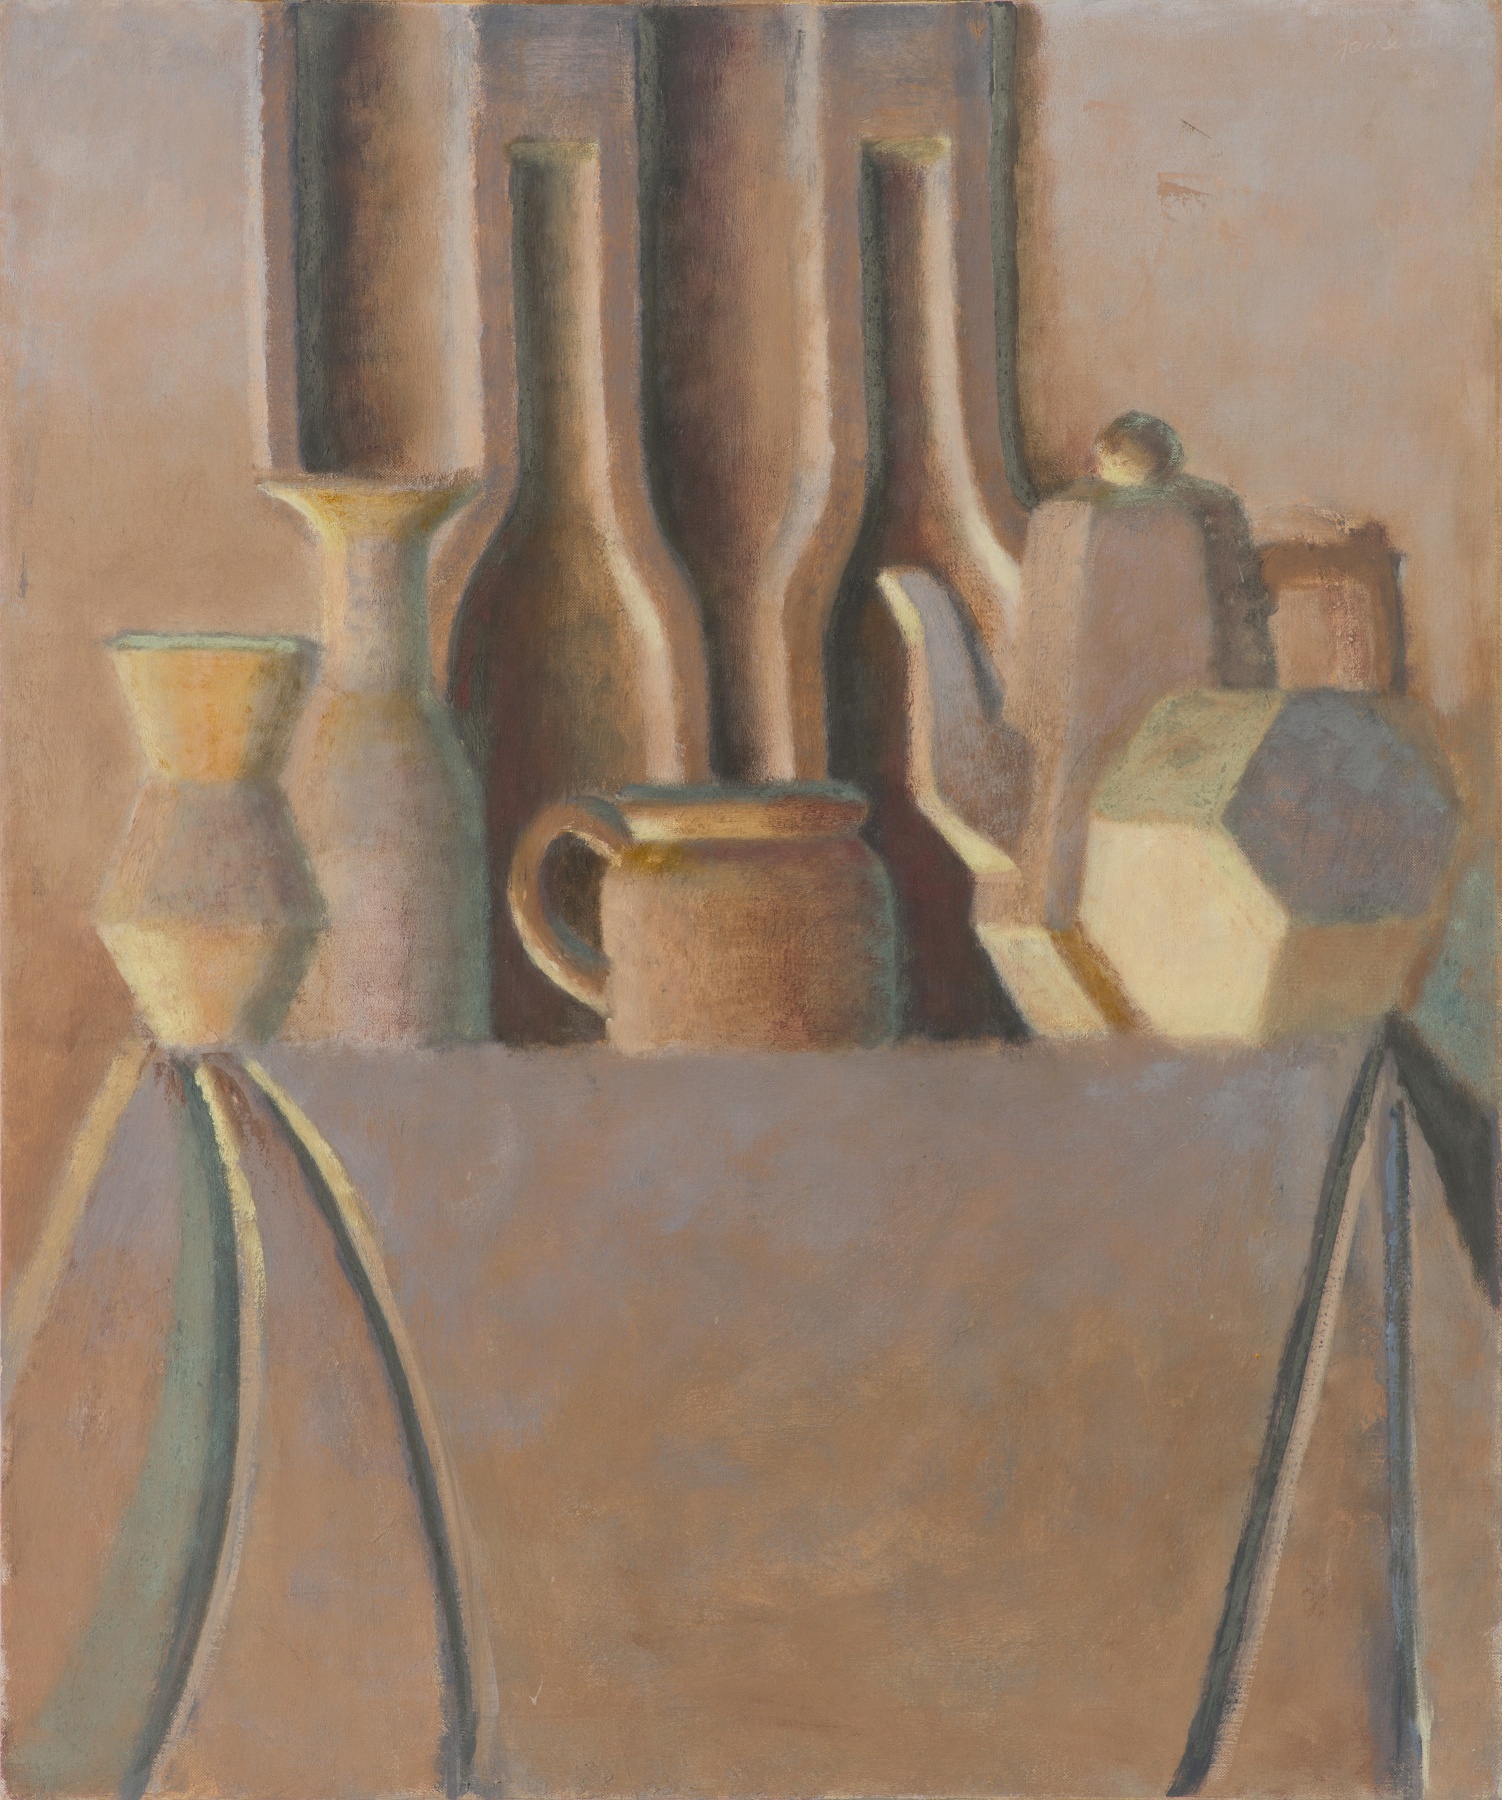 Jane Wilson: Reflected Still Life - February 17 - March 26, 2022 - Viewing Room - DC Moore Gallery Viewing Room